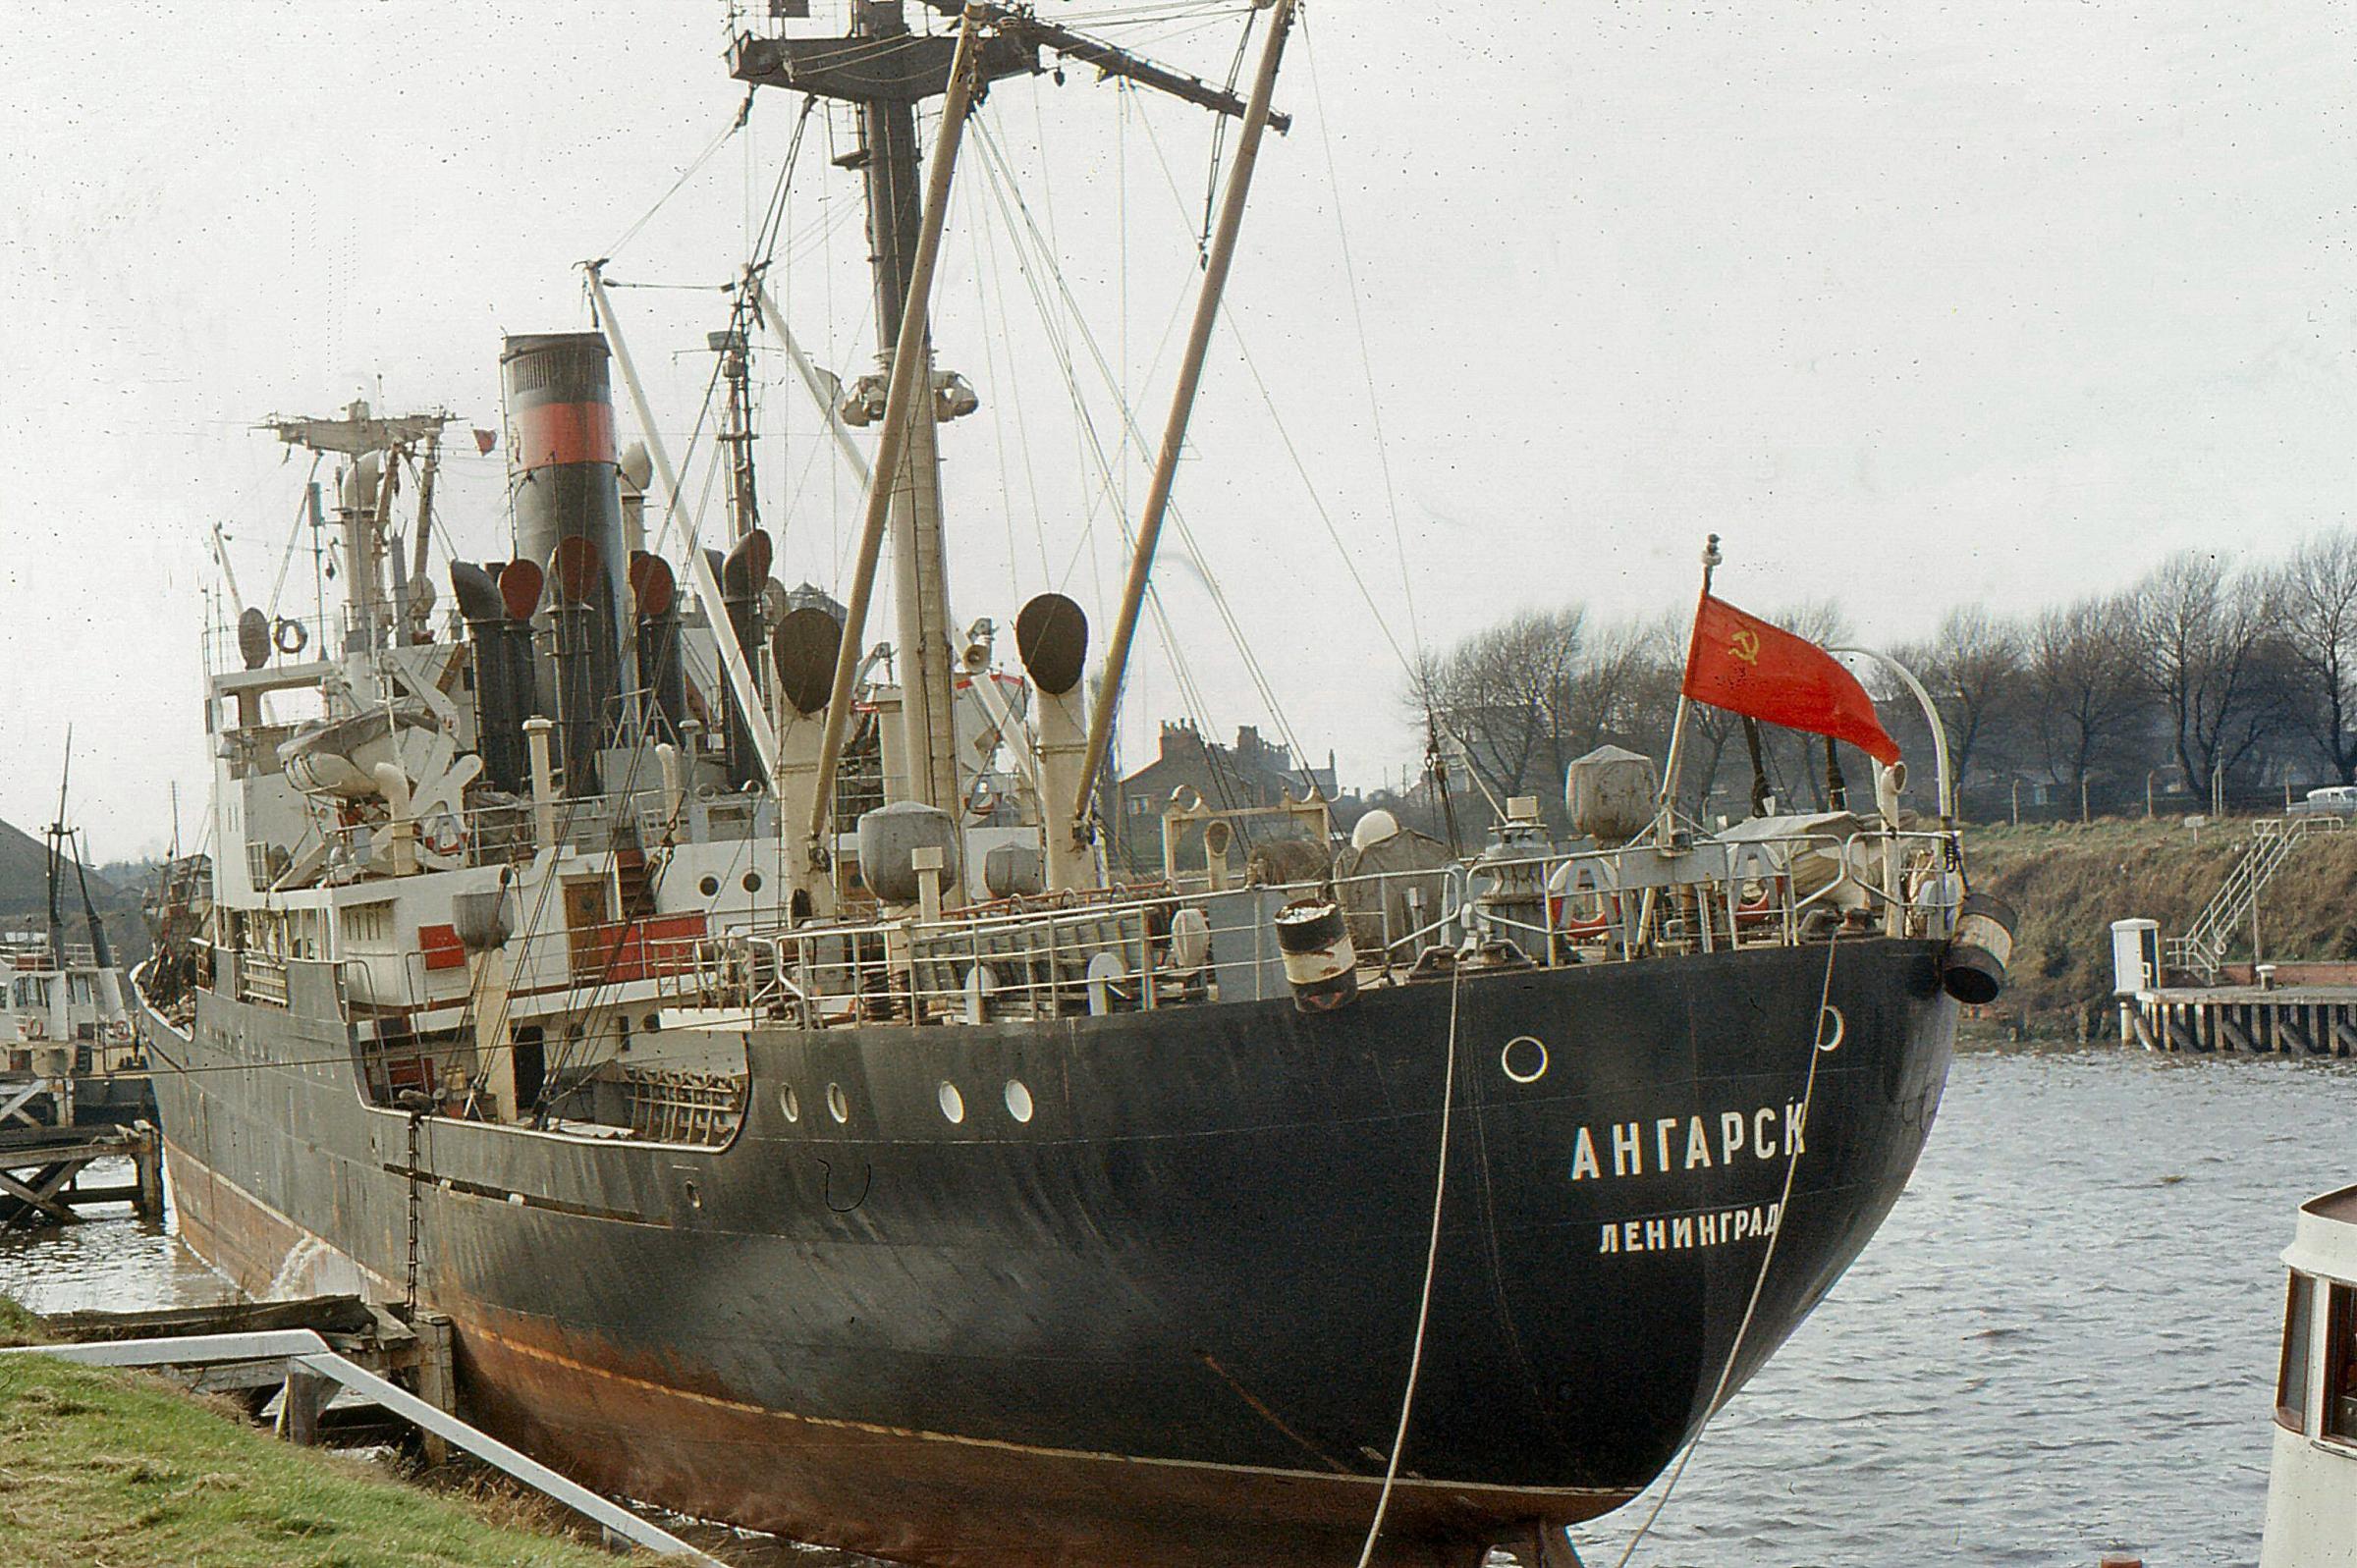 A ship bearing the Soviet Union flag in Warrington in March 1967 (Image: Eddie Whitham)